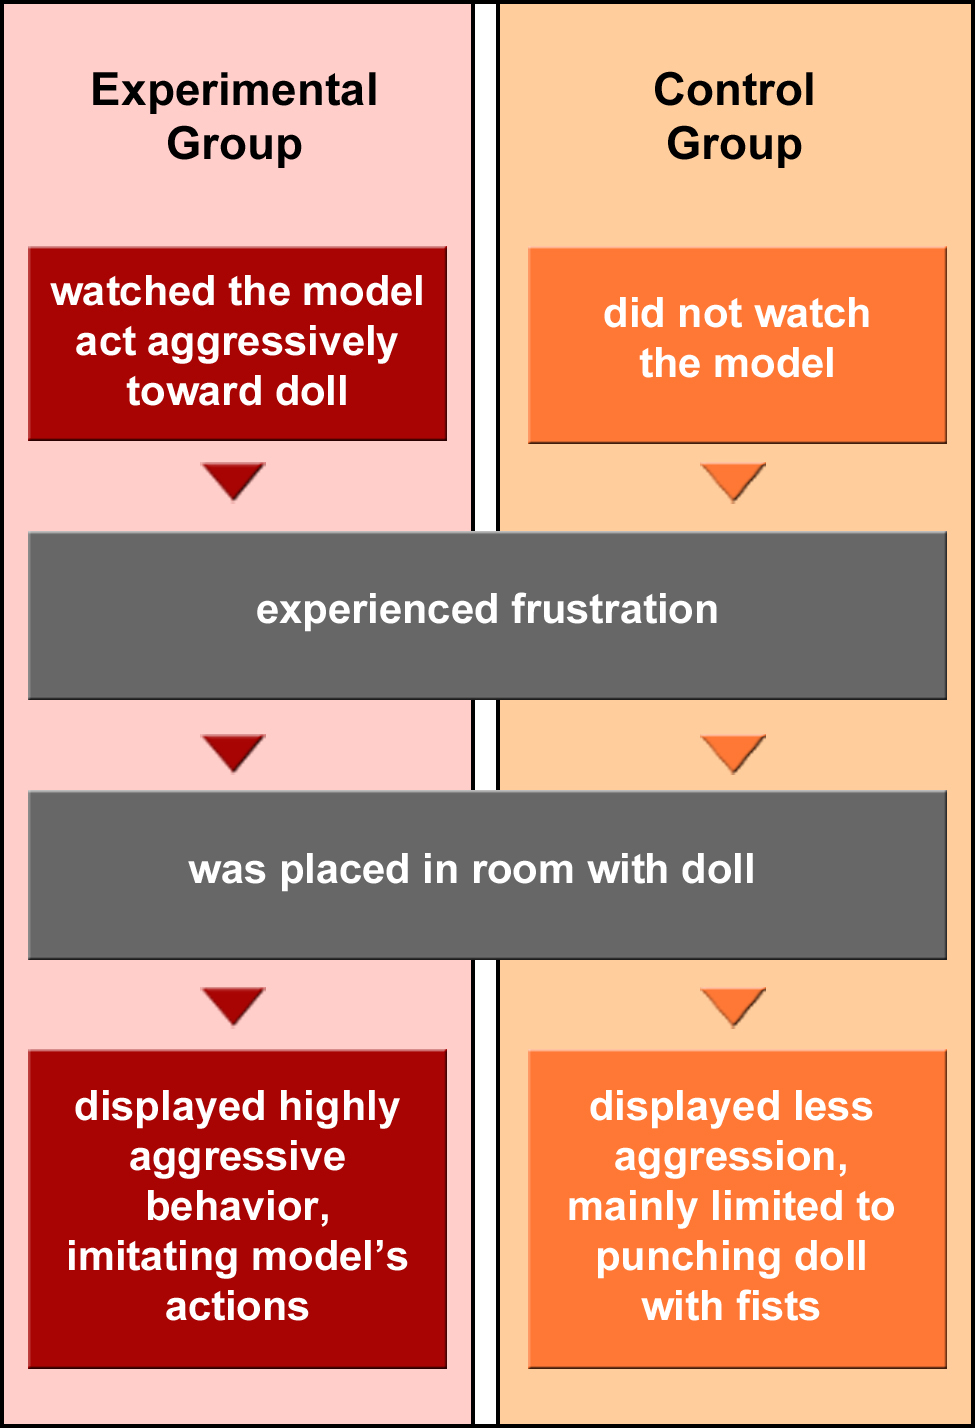 A flow chart summaries the results of Bandura’s experiment. The experimental group watched the adult model act aggressively toward the doll, then experienced frustration, and were placed in a room with the Bobo doll. The children in the experimental group displayed highly aggressive behavior that imitated the model’s actions. The control group did not watch the adult model act aggressively toward the doll, then experienced frustration, and were placed in a room with the Bobo doll. The children in the control group displayed less aggression, and their aggression was mainly limited to punching the doll with their fists.